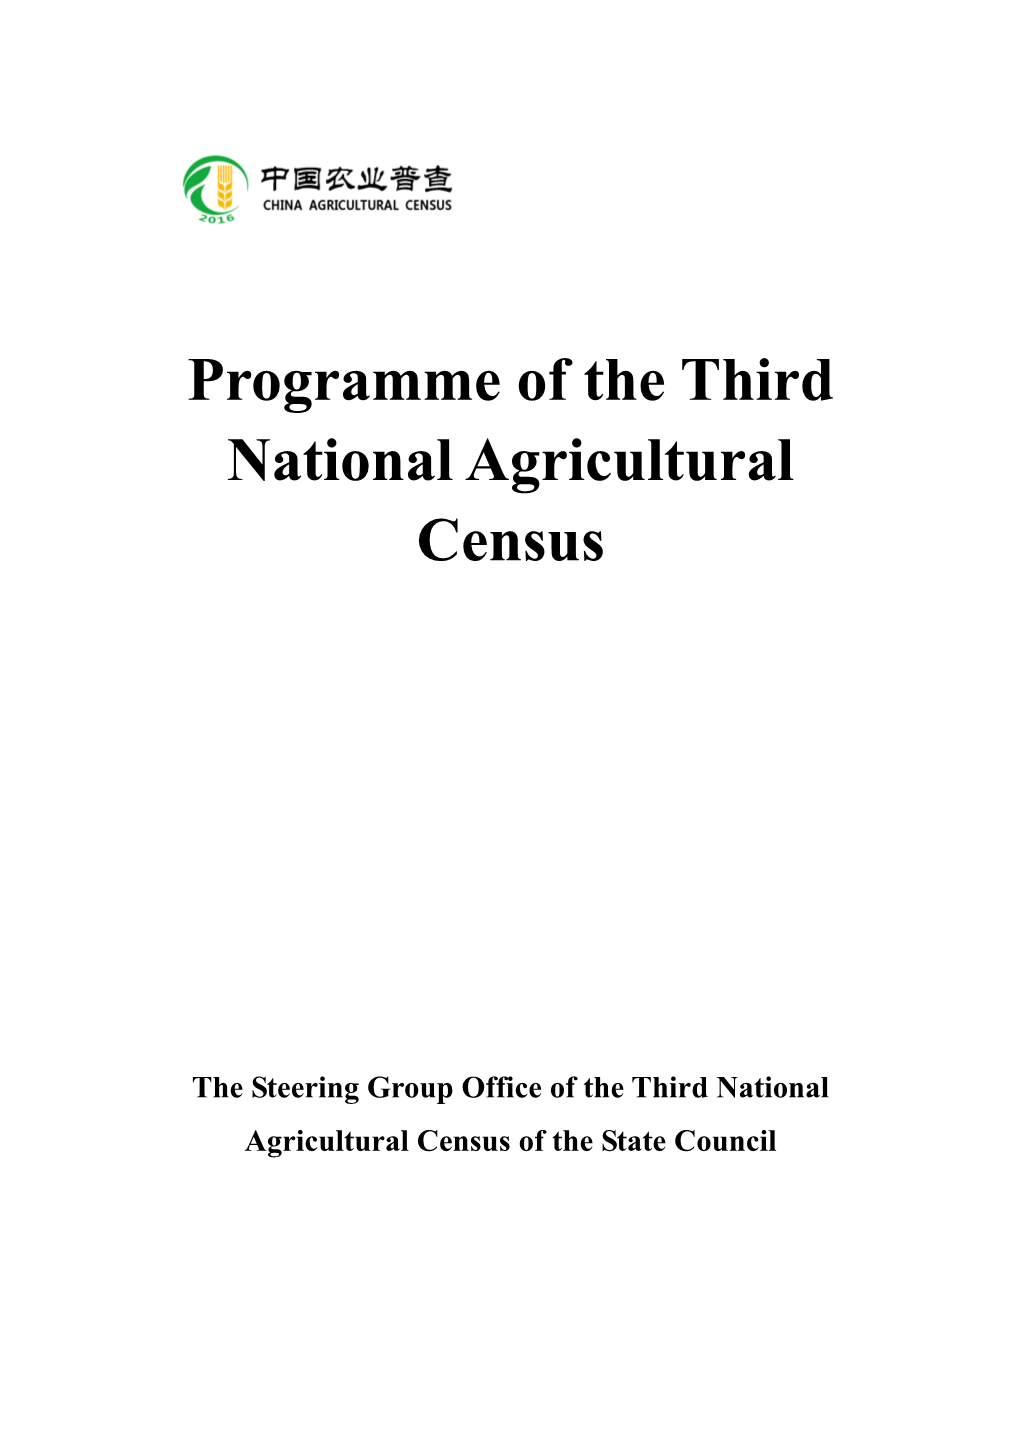 Programme of the Third National Agricultural Census